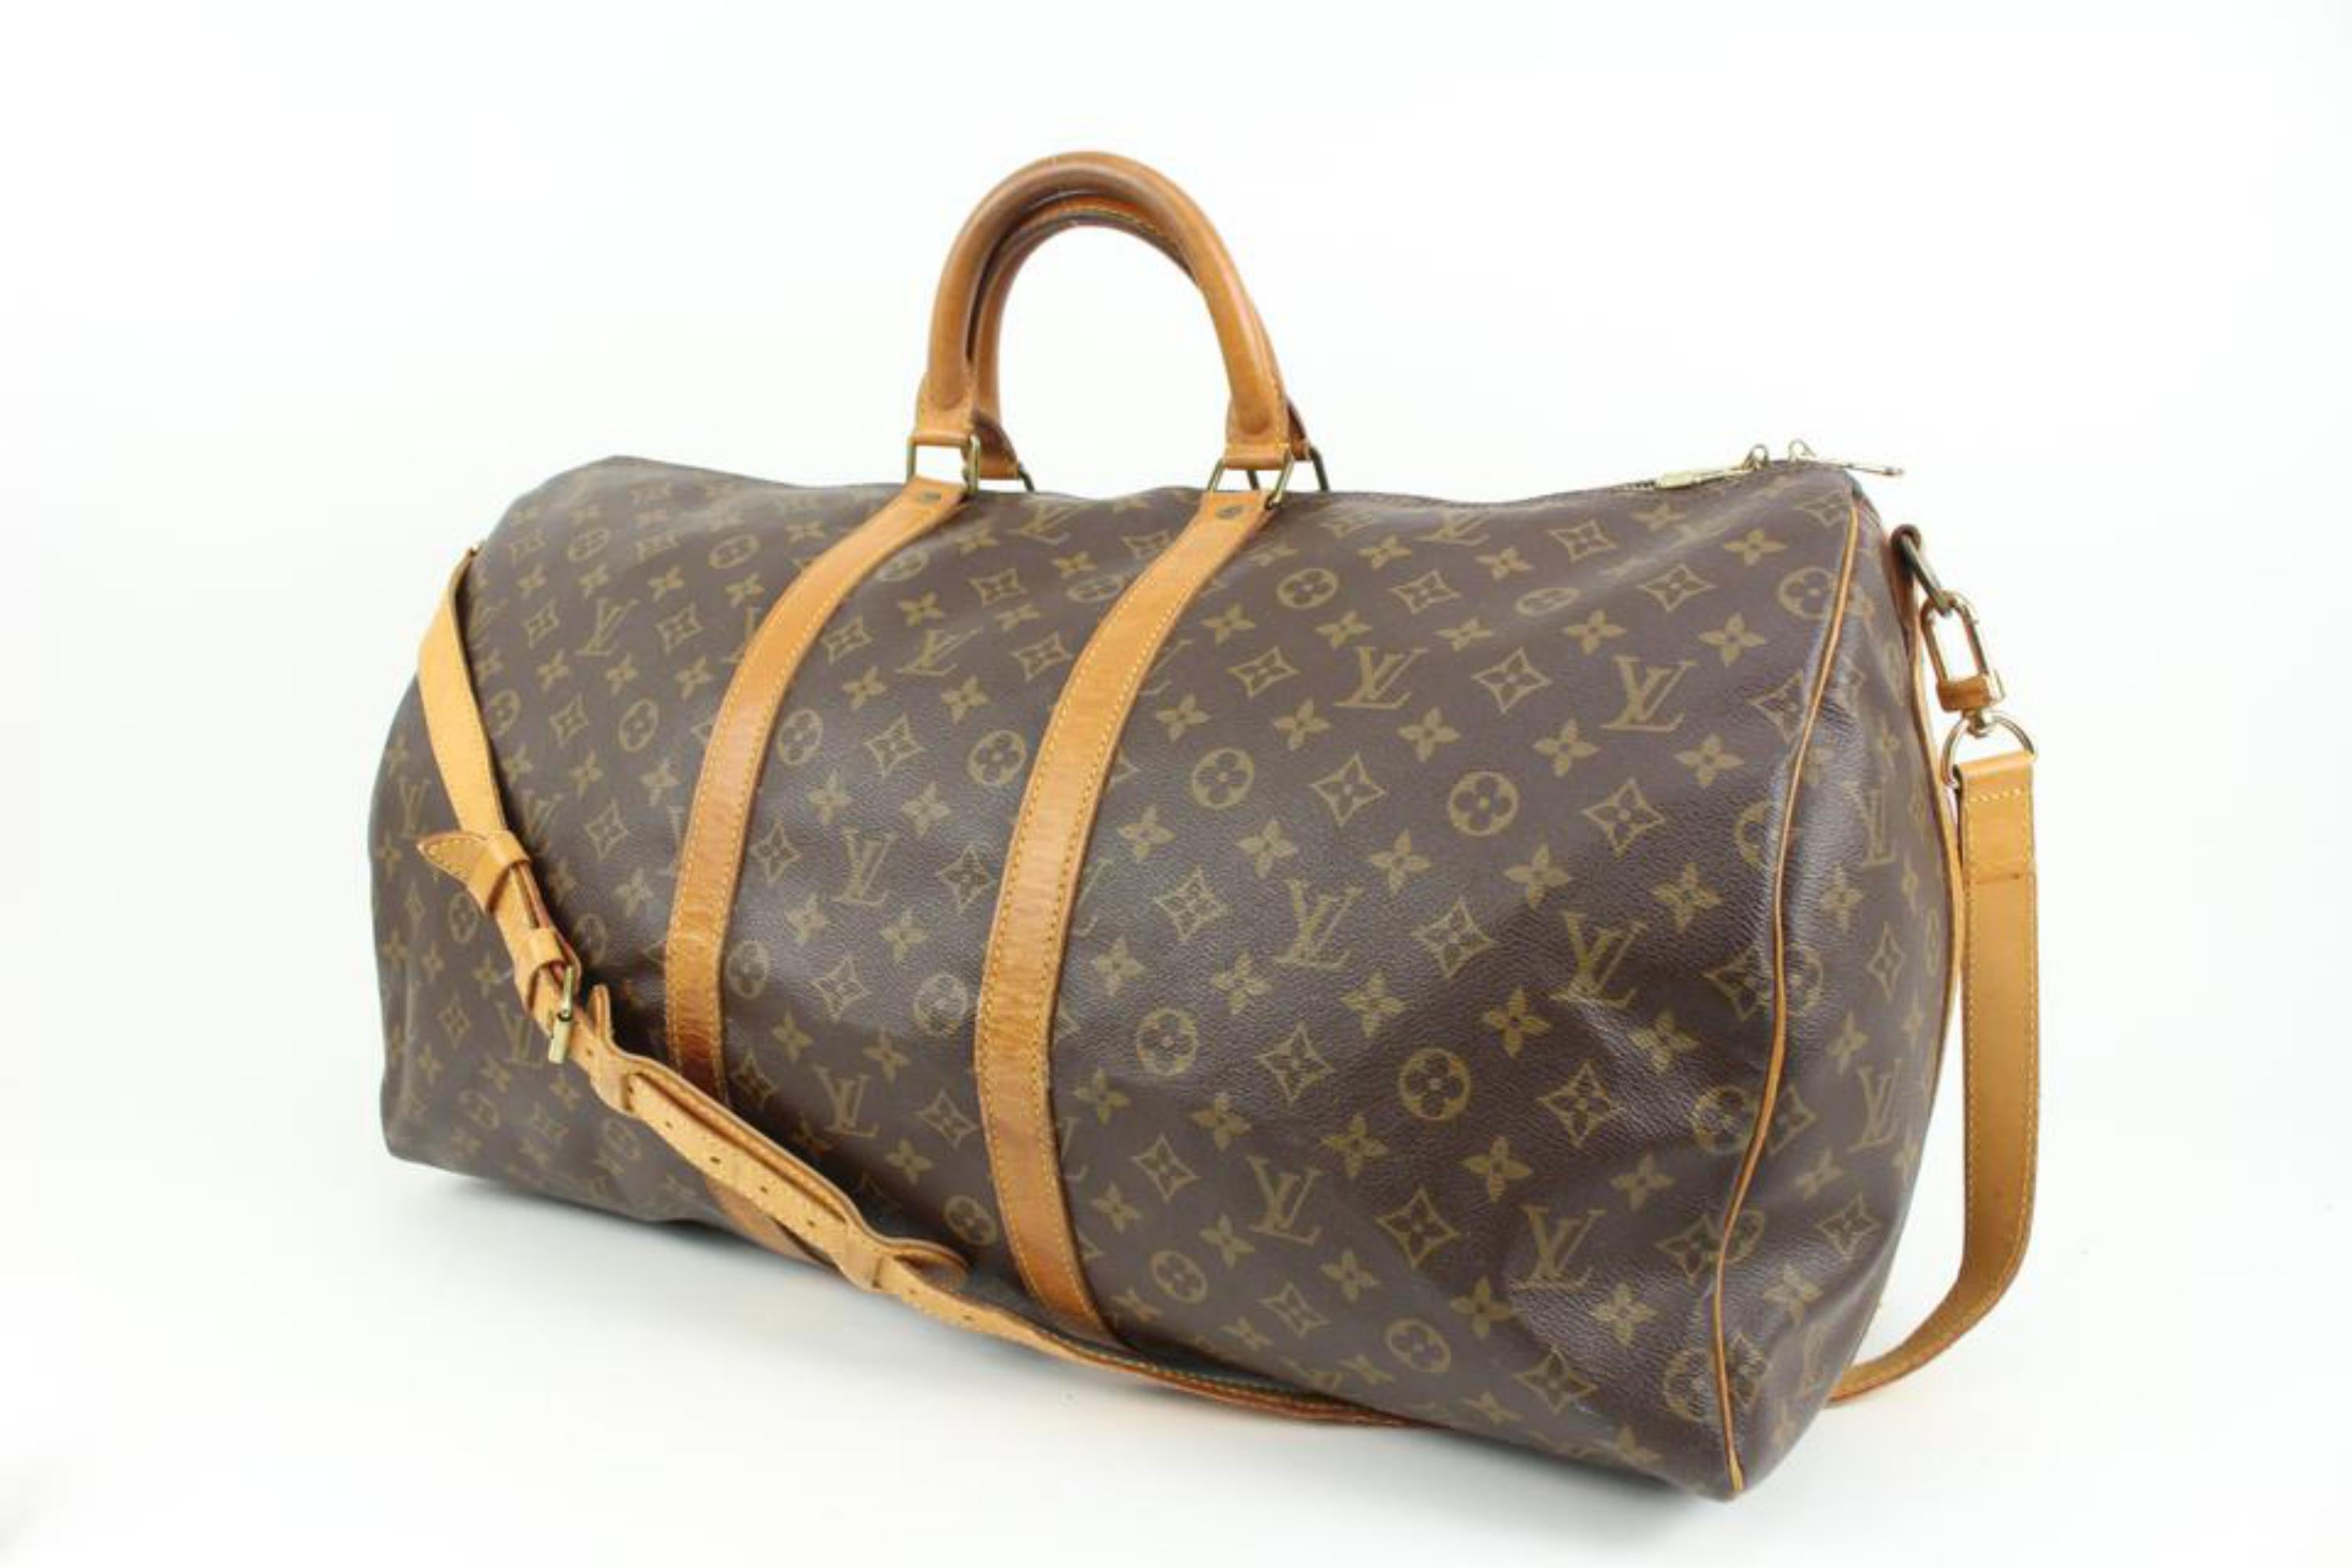 Louis Vuitton Monogram Keepall Bandouliere 55 Duffle Bag with Strap 83lk411s
Date Code/Serial Number: FH8911
Measurements: Length:  22